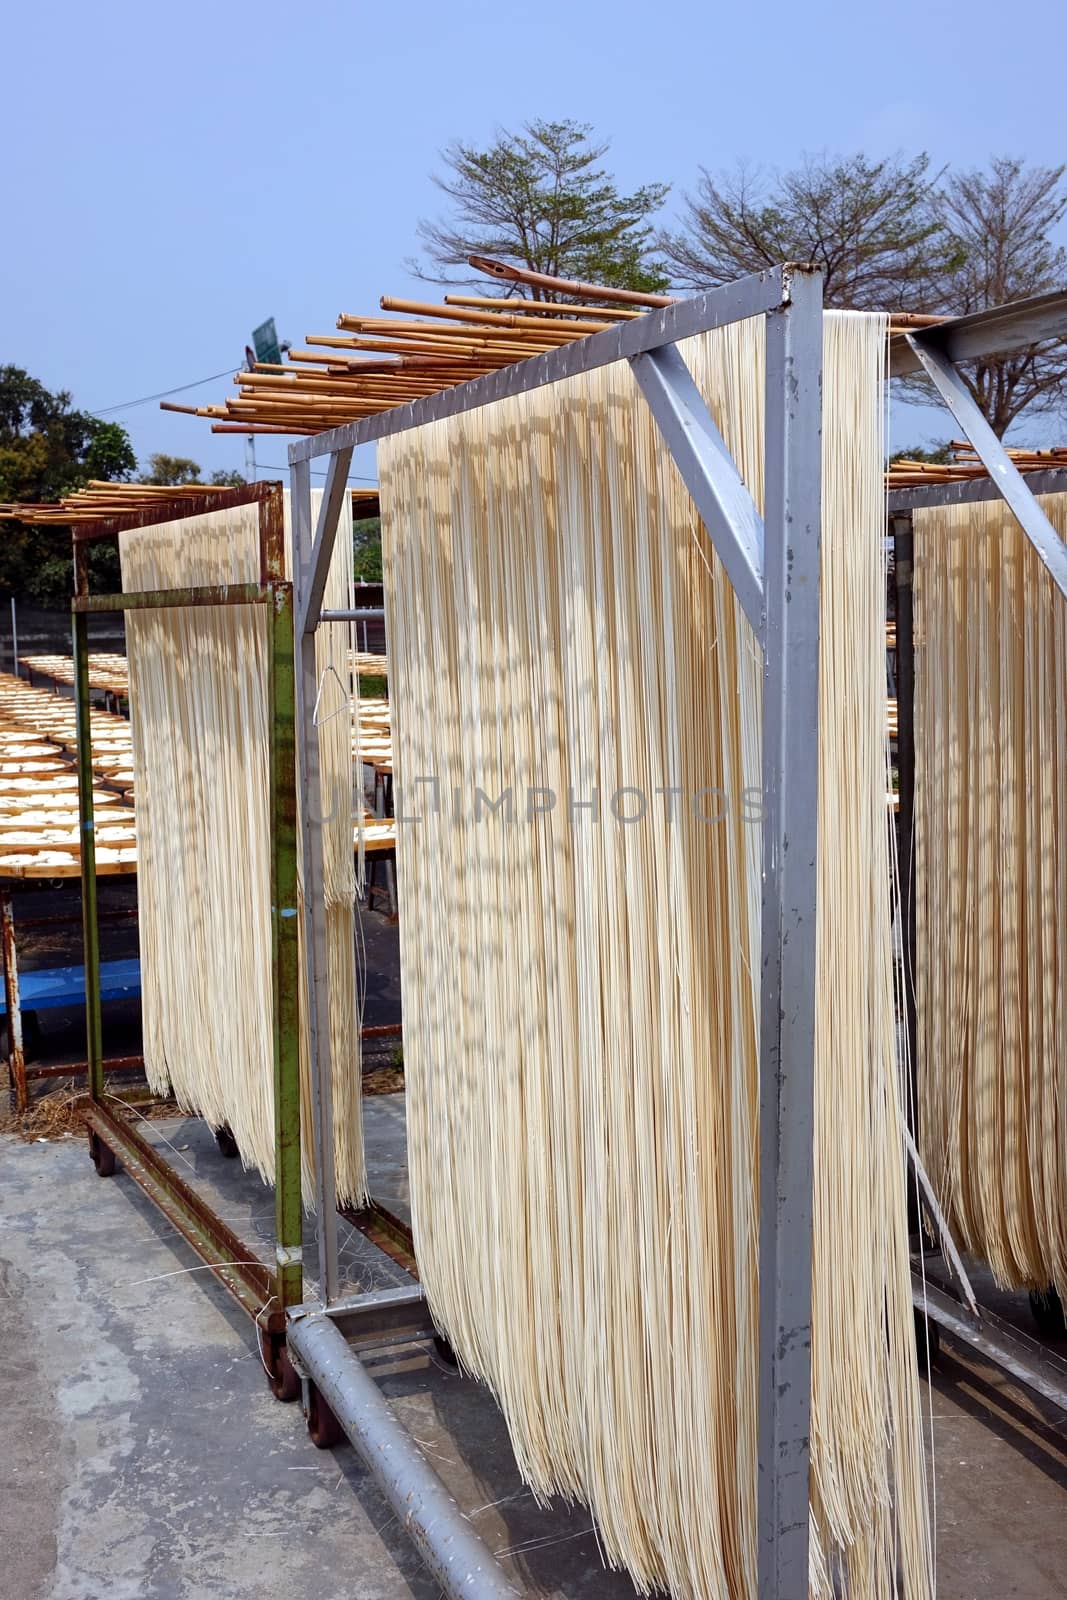 Freshly made noodles are dried in the sun, a specialty in southwest Taiwan
